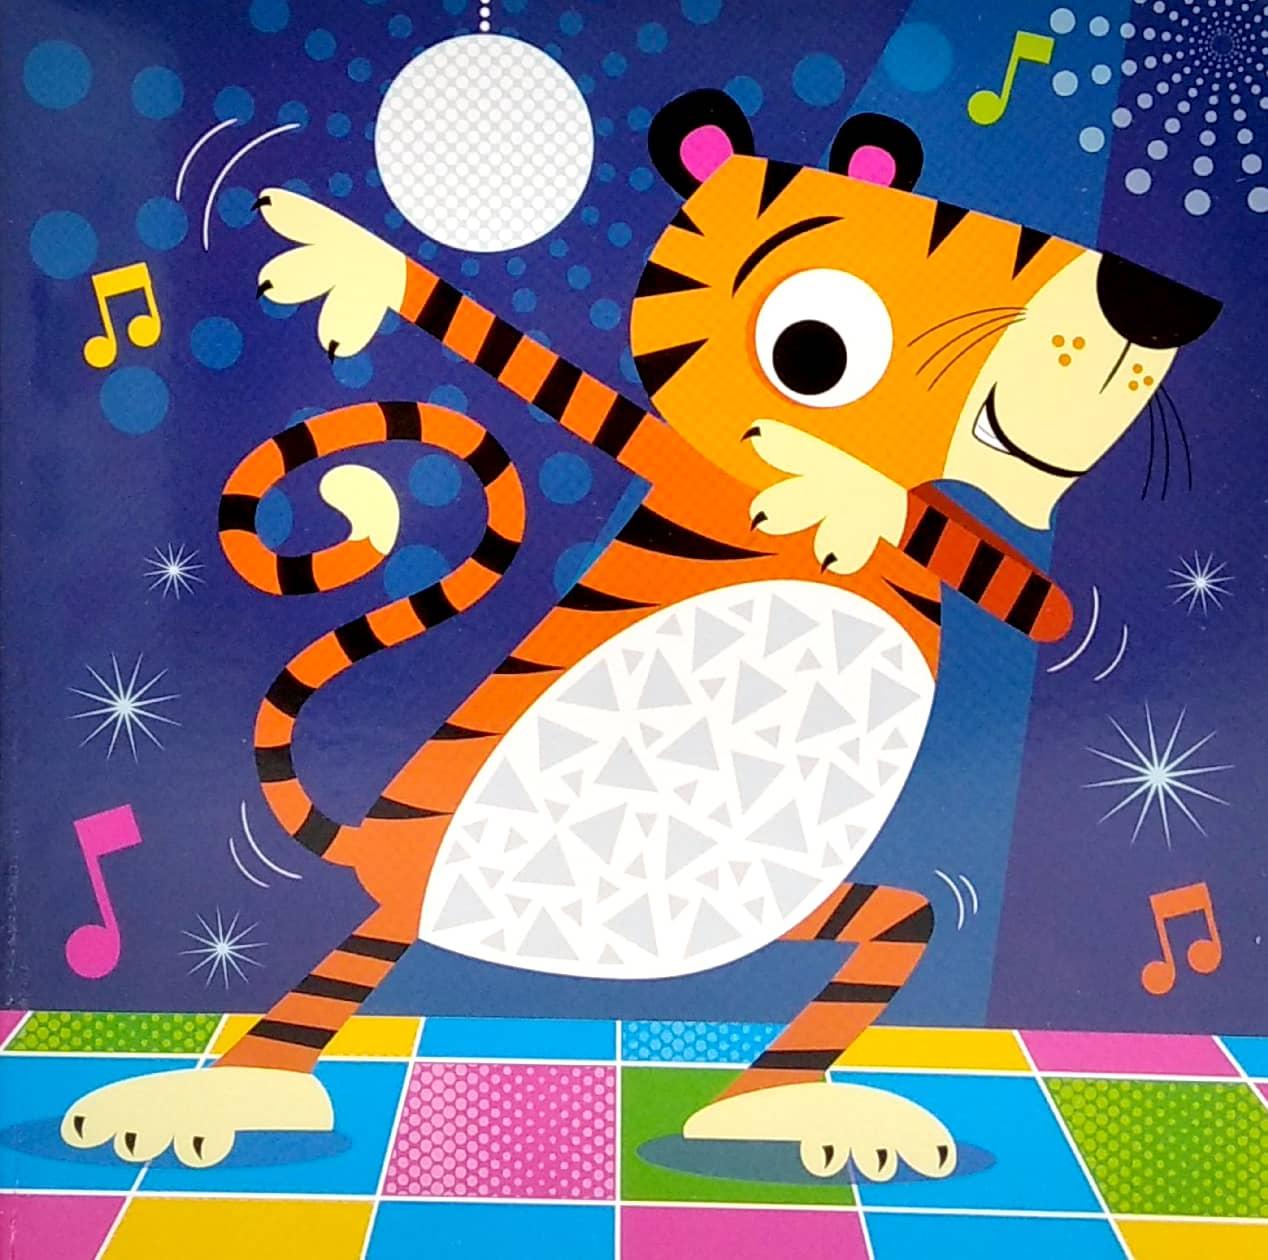 Never Touch A Tiger! 3 Jigsaw Puzzles